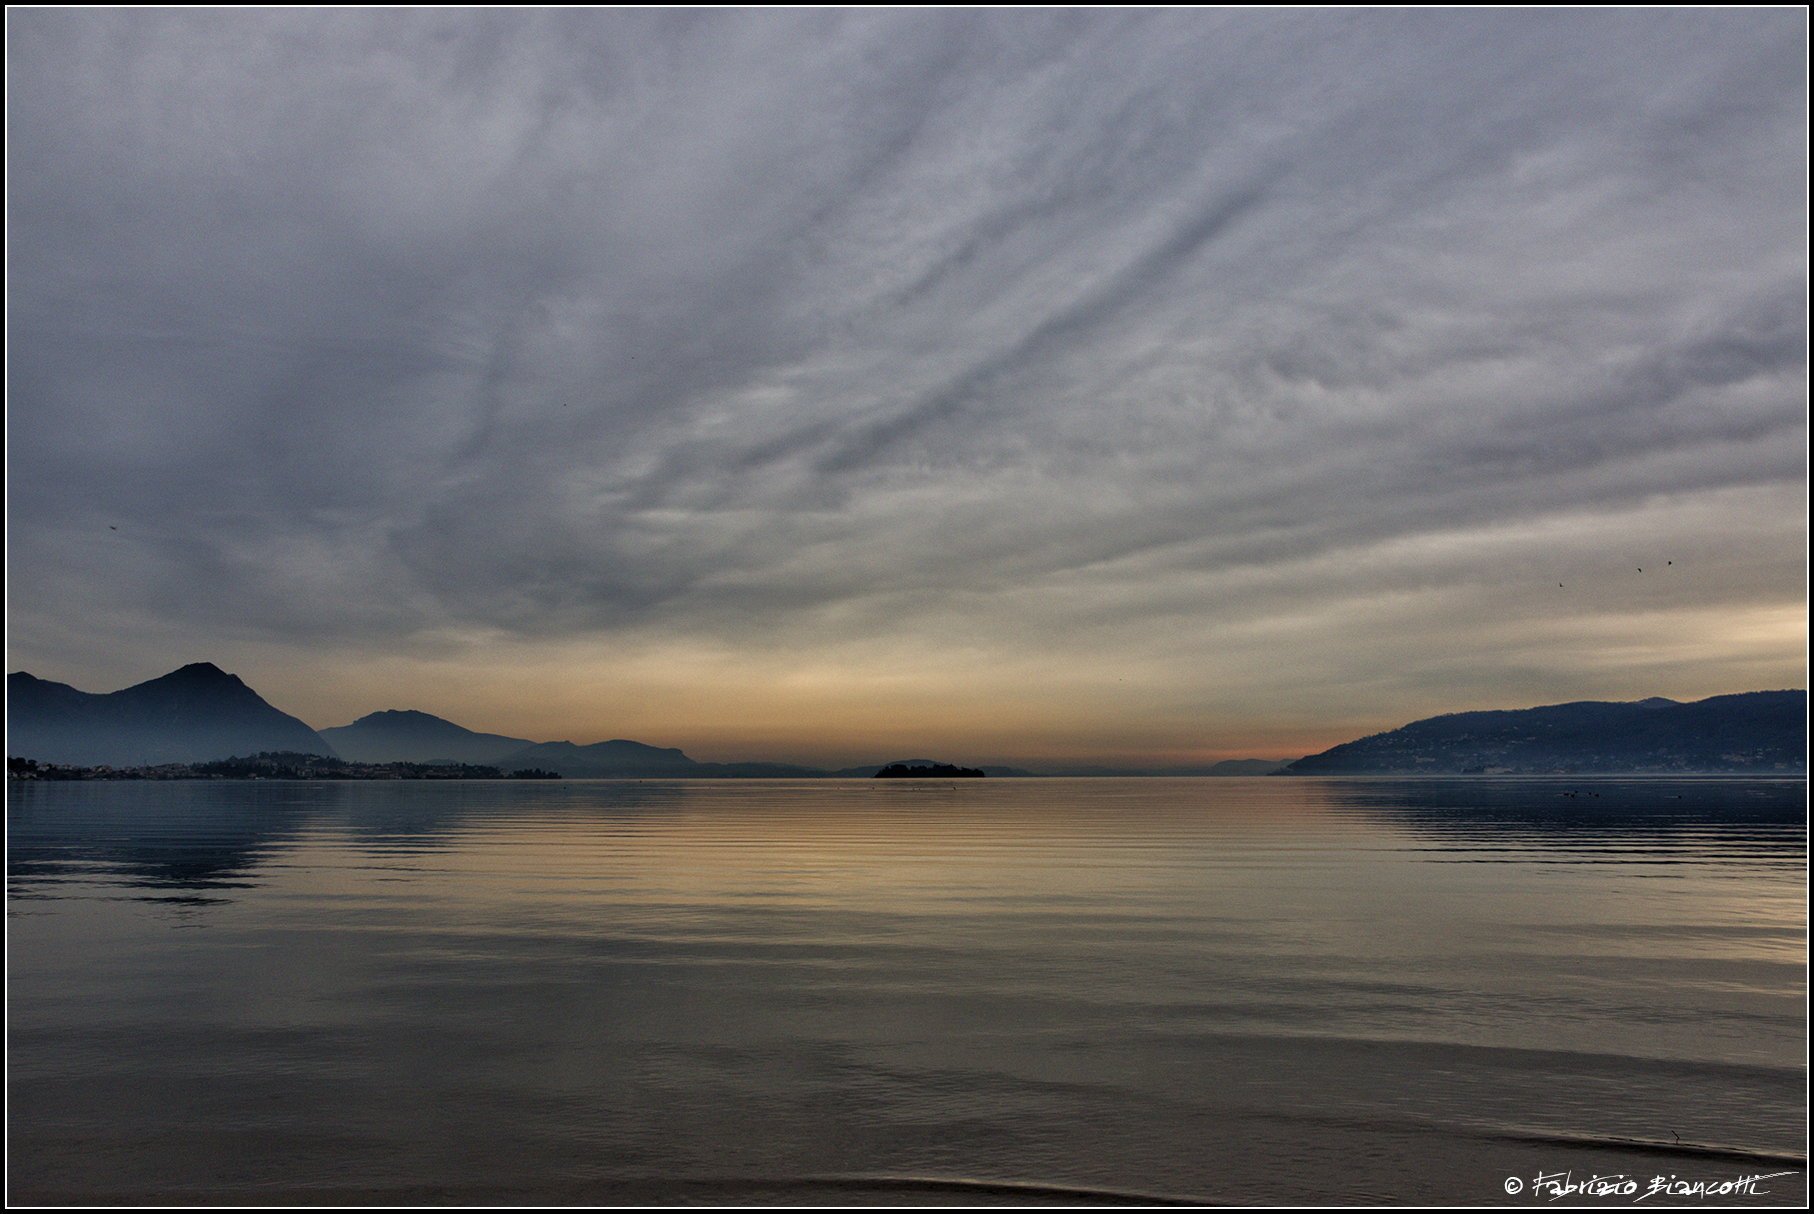 One evening on Lake Maggiore...